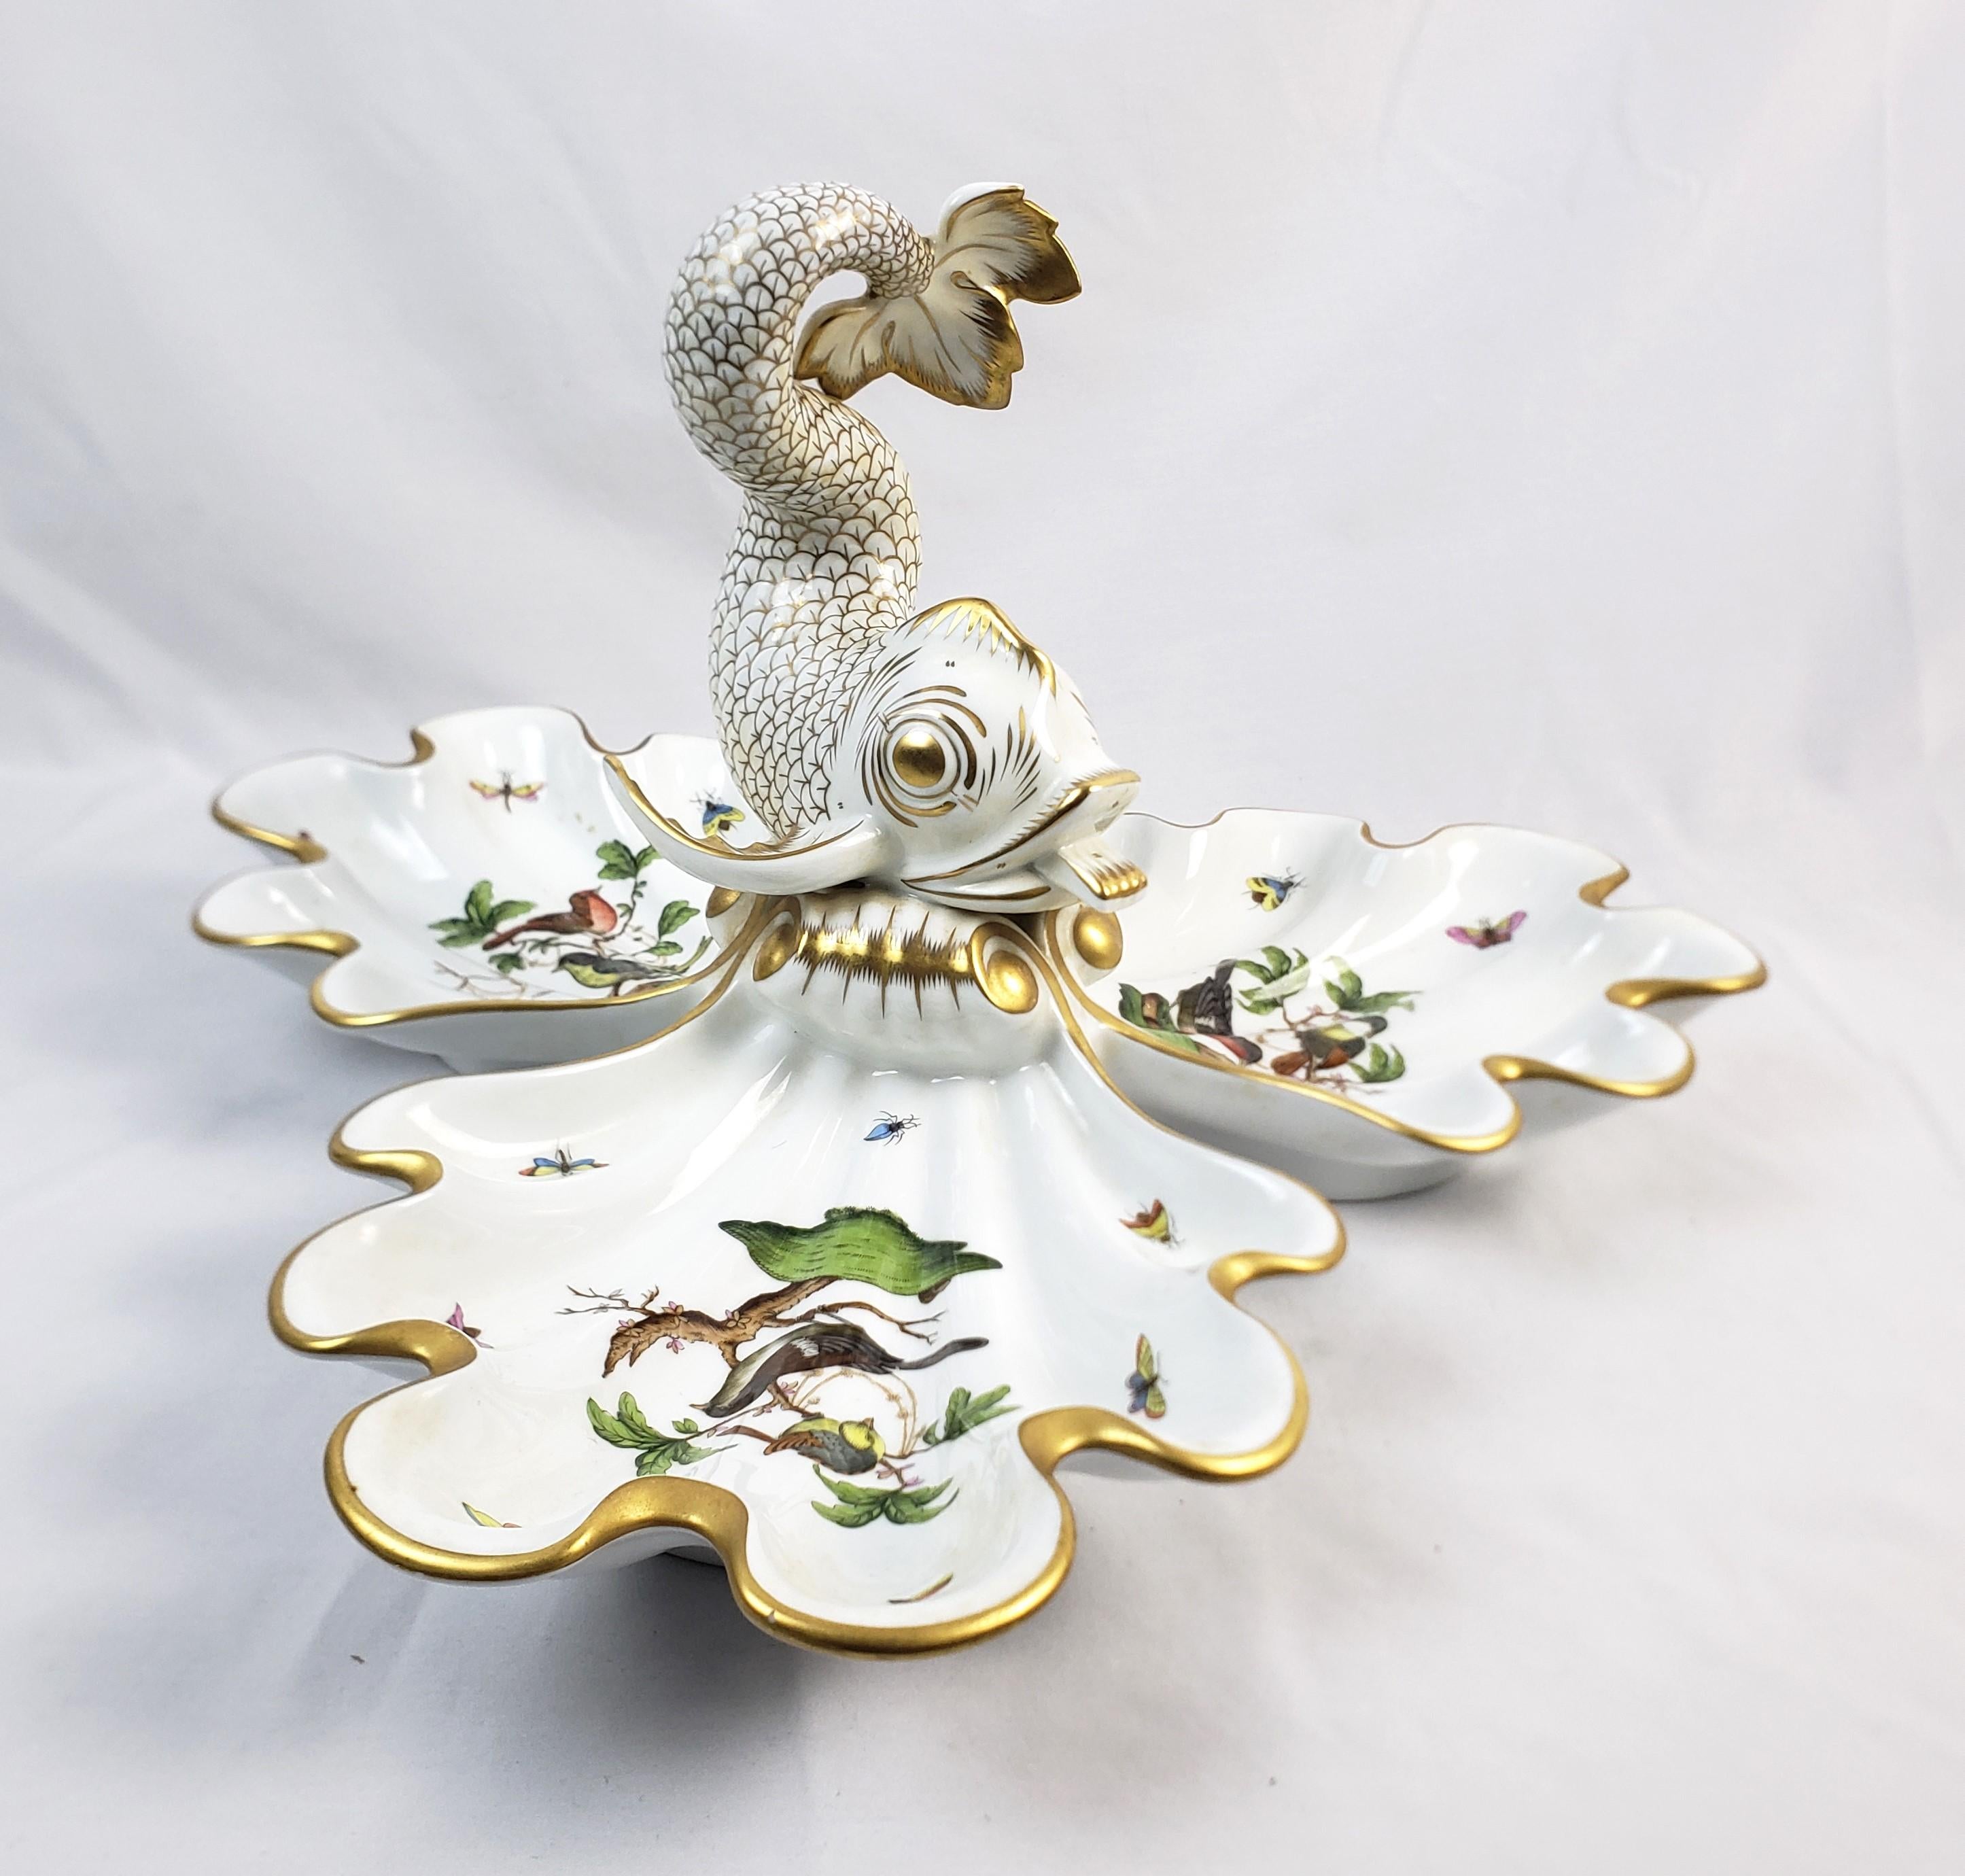 This large vintage centerpiece was made by the well known Herend factory of Hungry and dates to April of 1993 and done in their highly decorative Rothschild Bird pattern. The centerpiece is composed of porcelain and ornately hand-painted with their